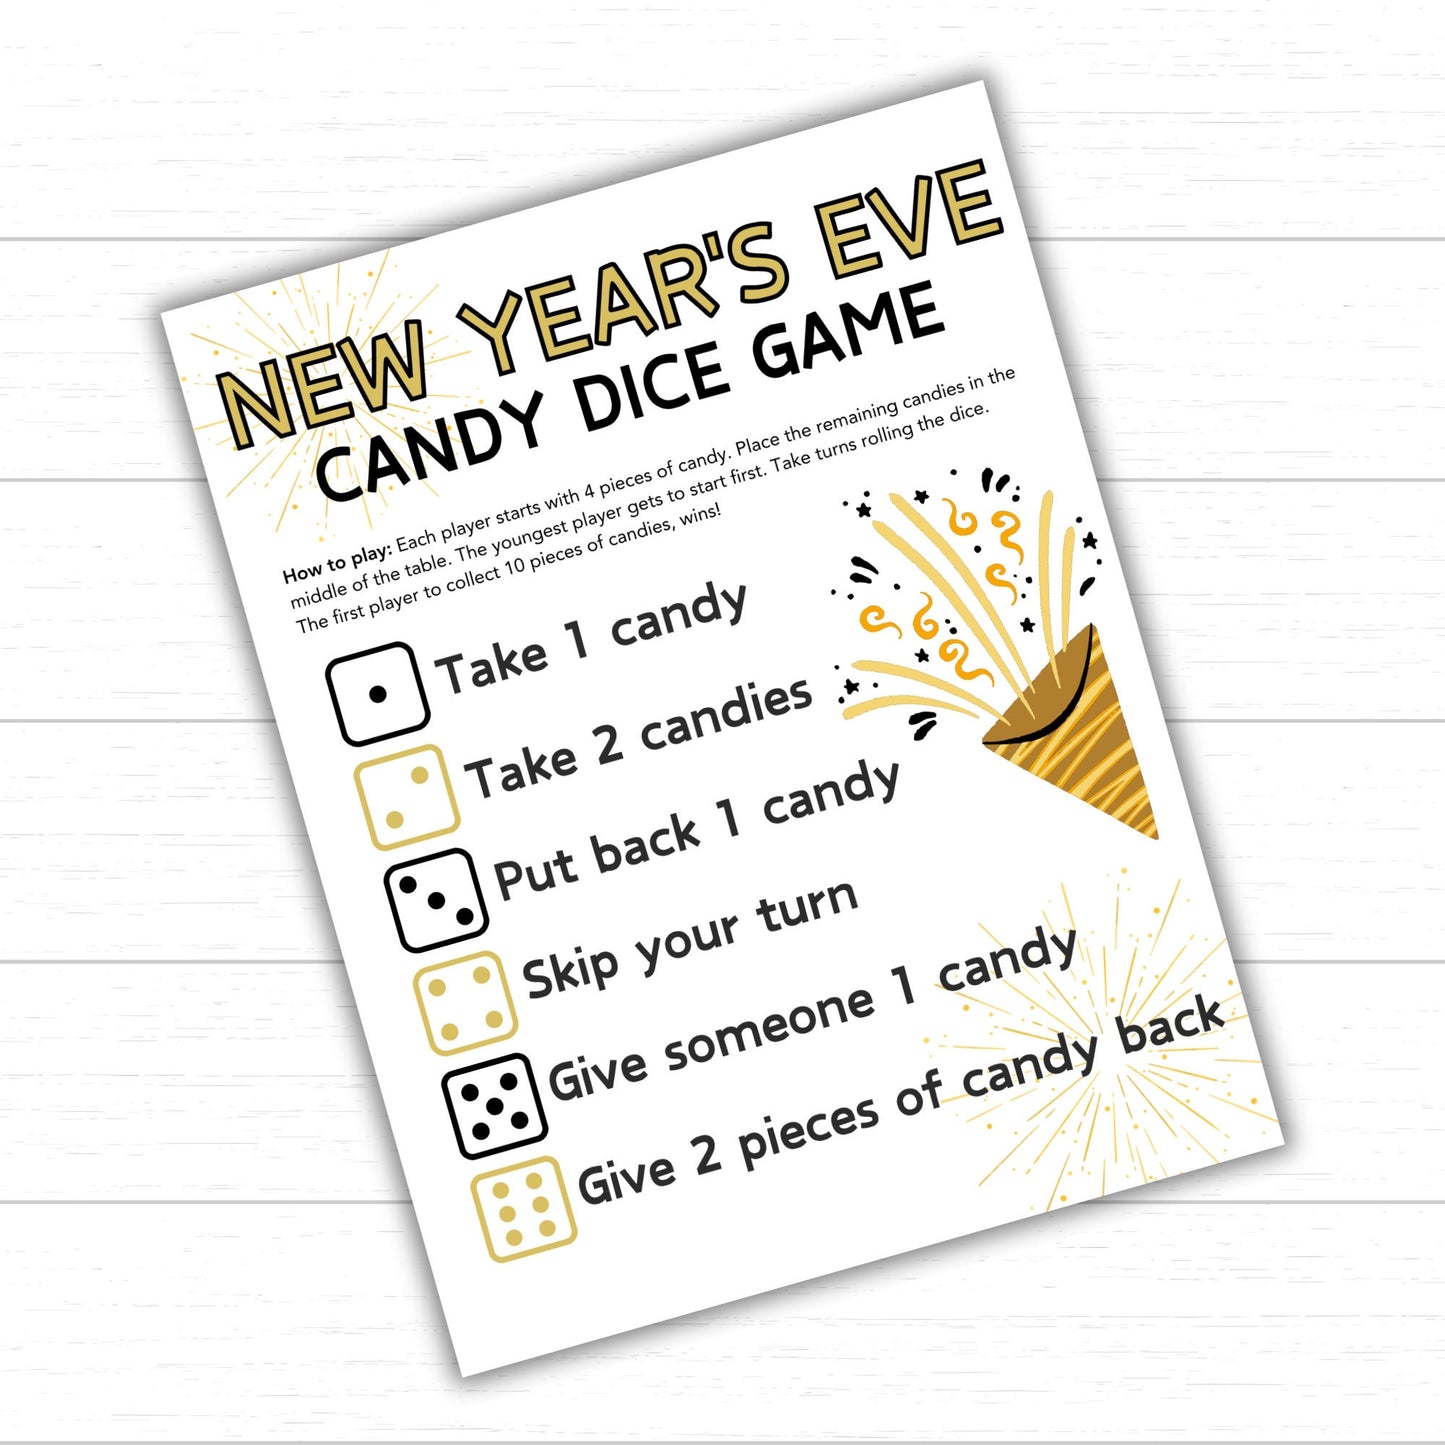 New Year's Eve Candy Dice Game, New Years Party Games for Kids, Candy Dice Games, Printable New Years Eve Games for Kids, New Year PDF